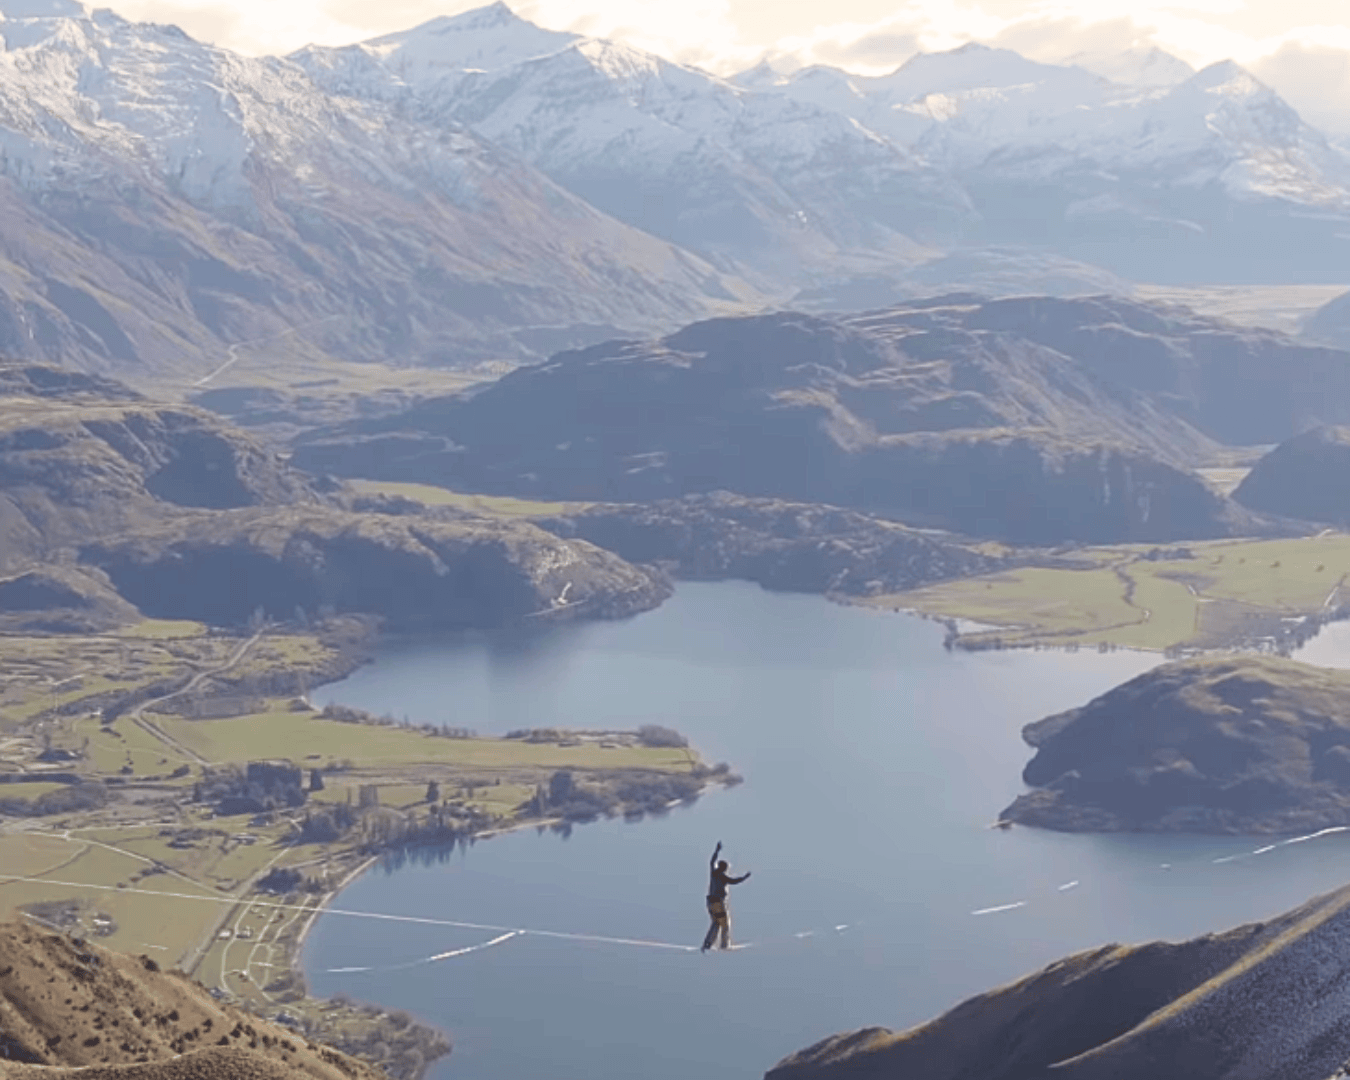 A man highlining over a lake and mountains in New Zealand